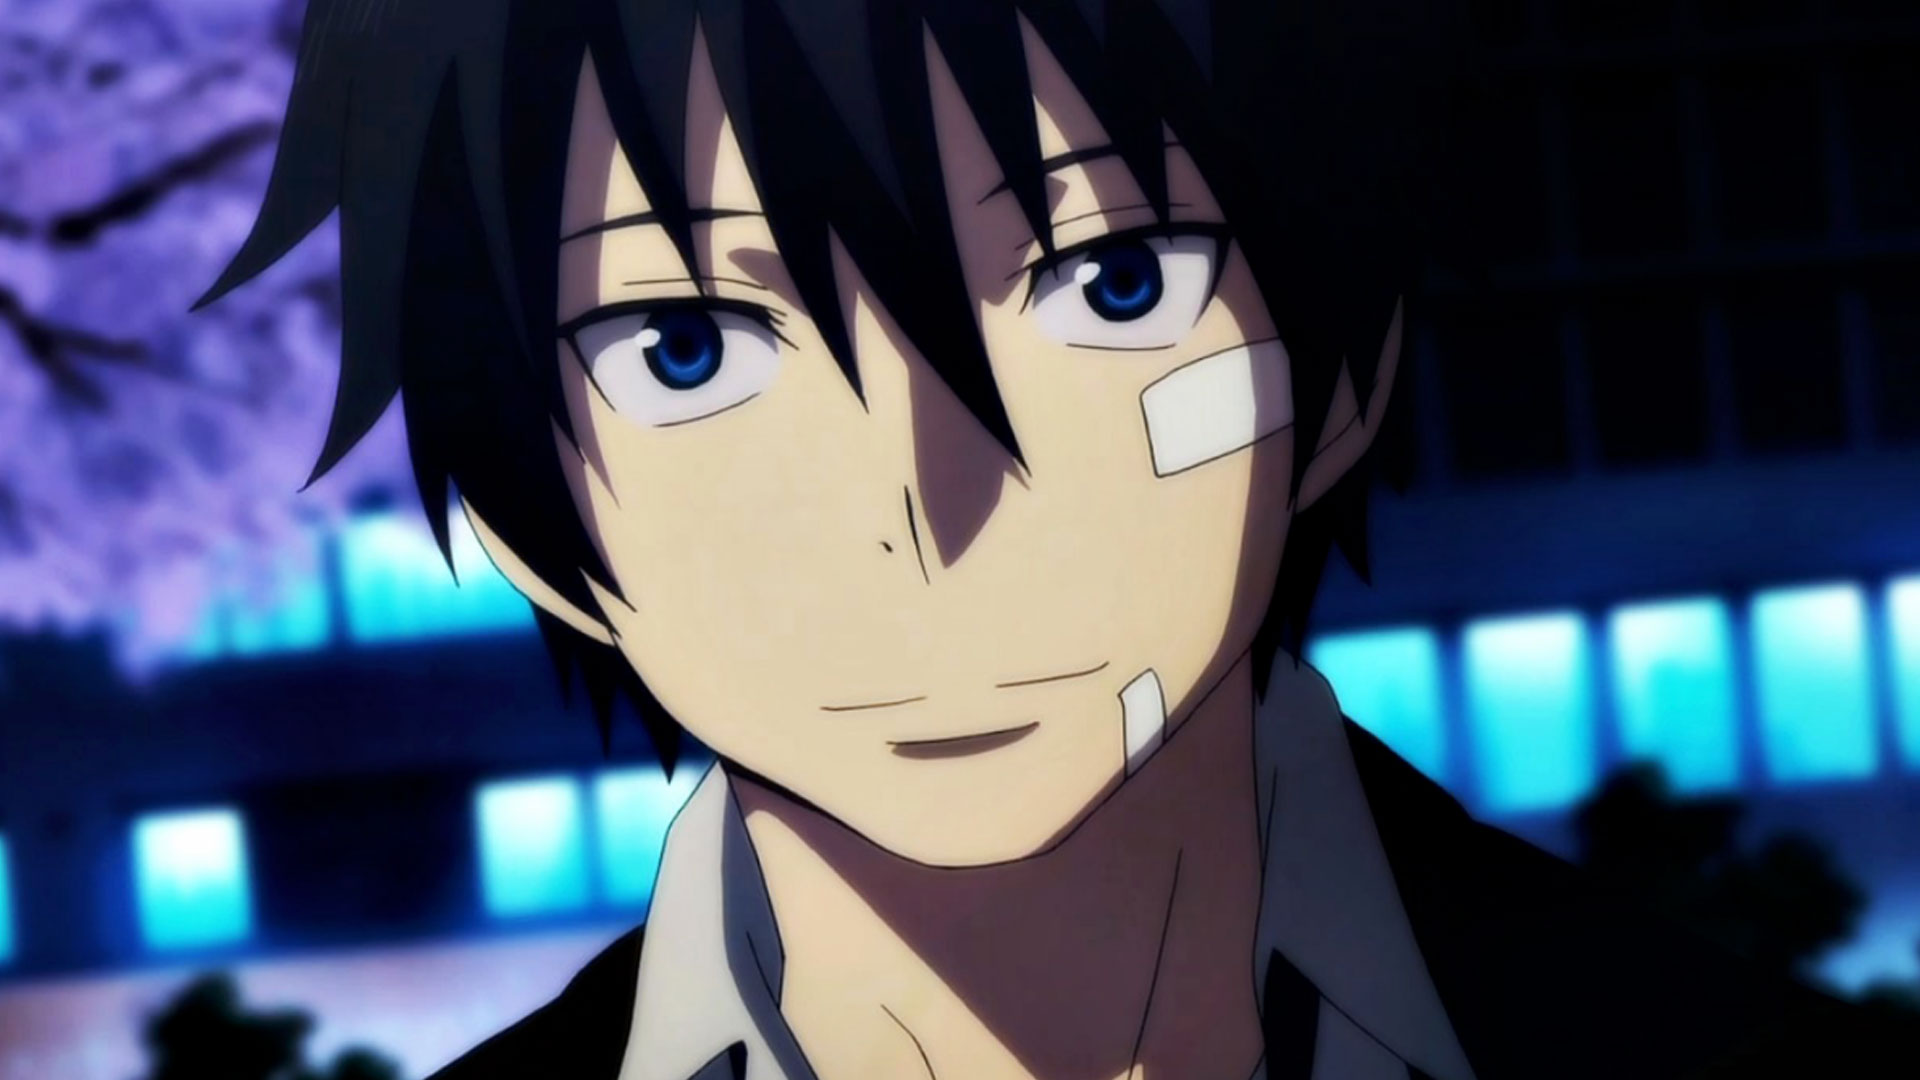 Stop Criticizing Rin From Blue Exorcist, He's Not a Bad Shonen Protagonist